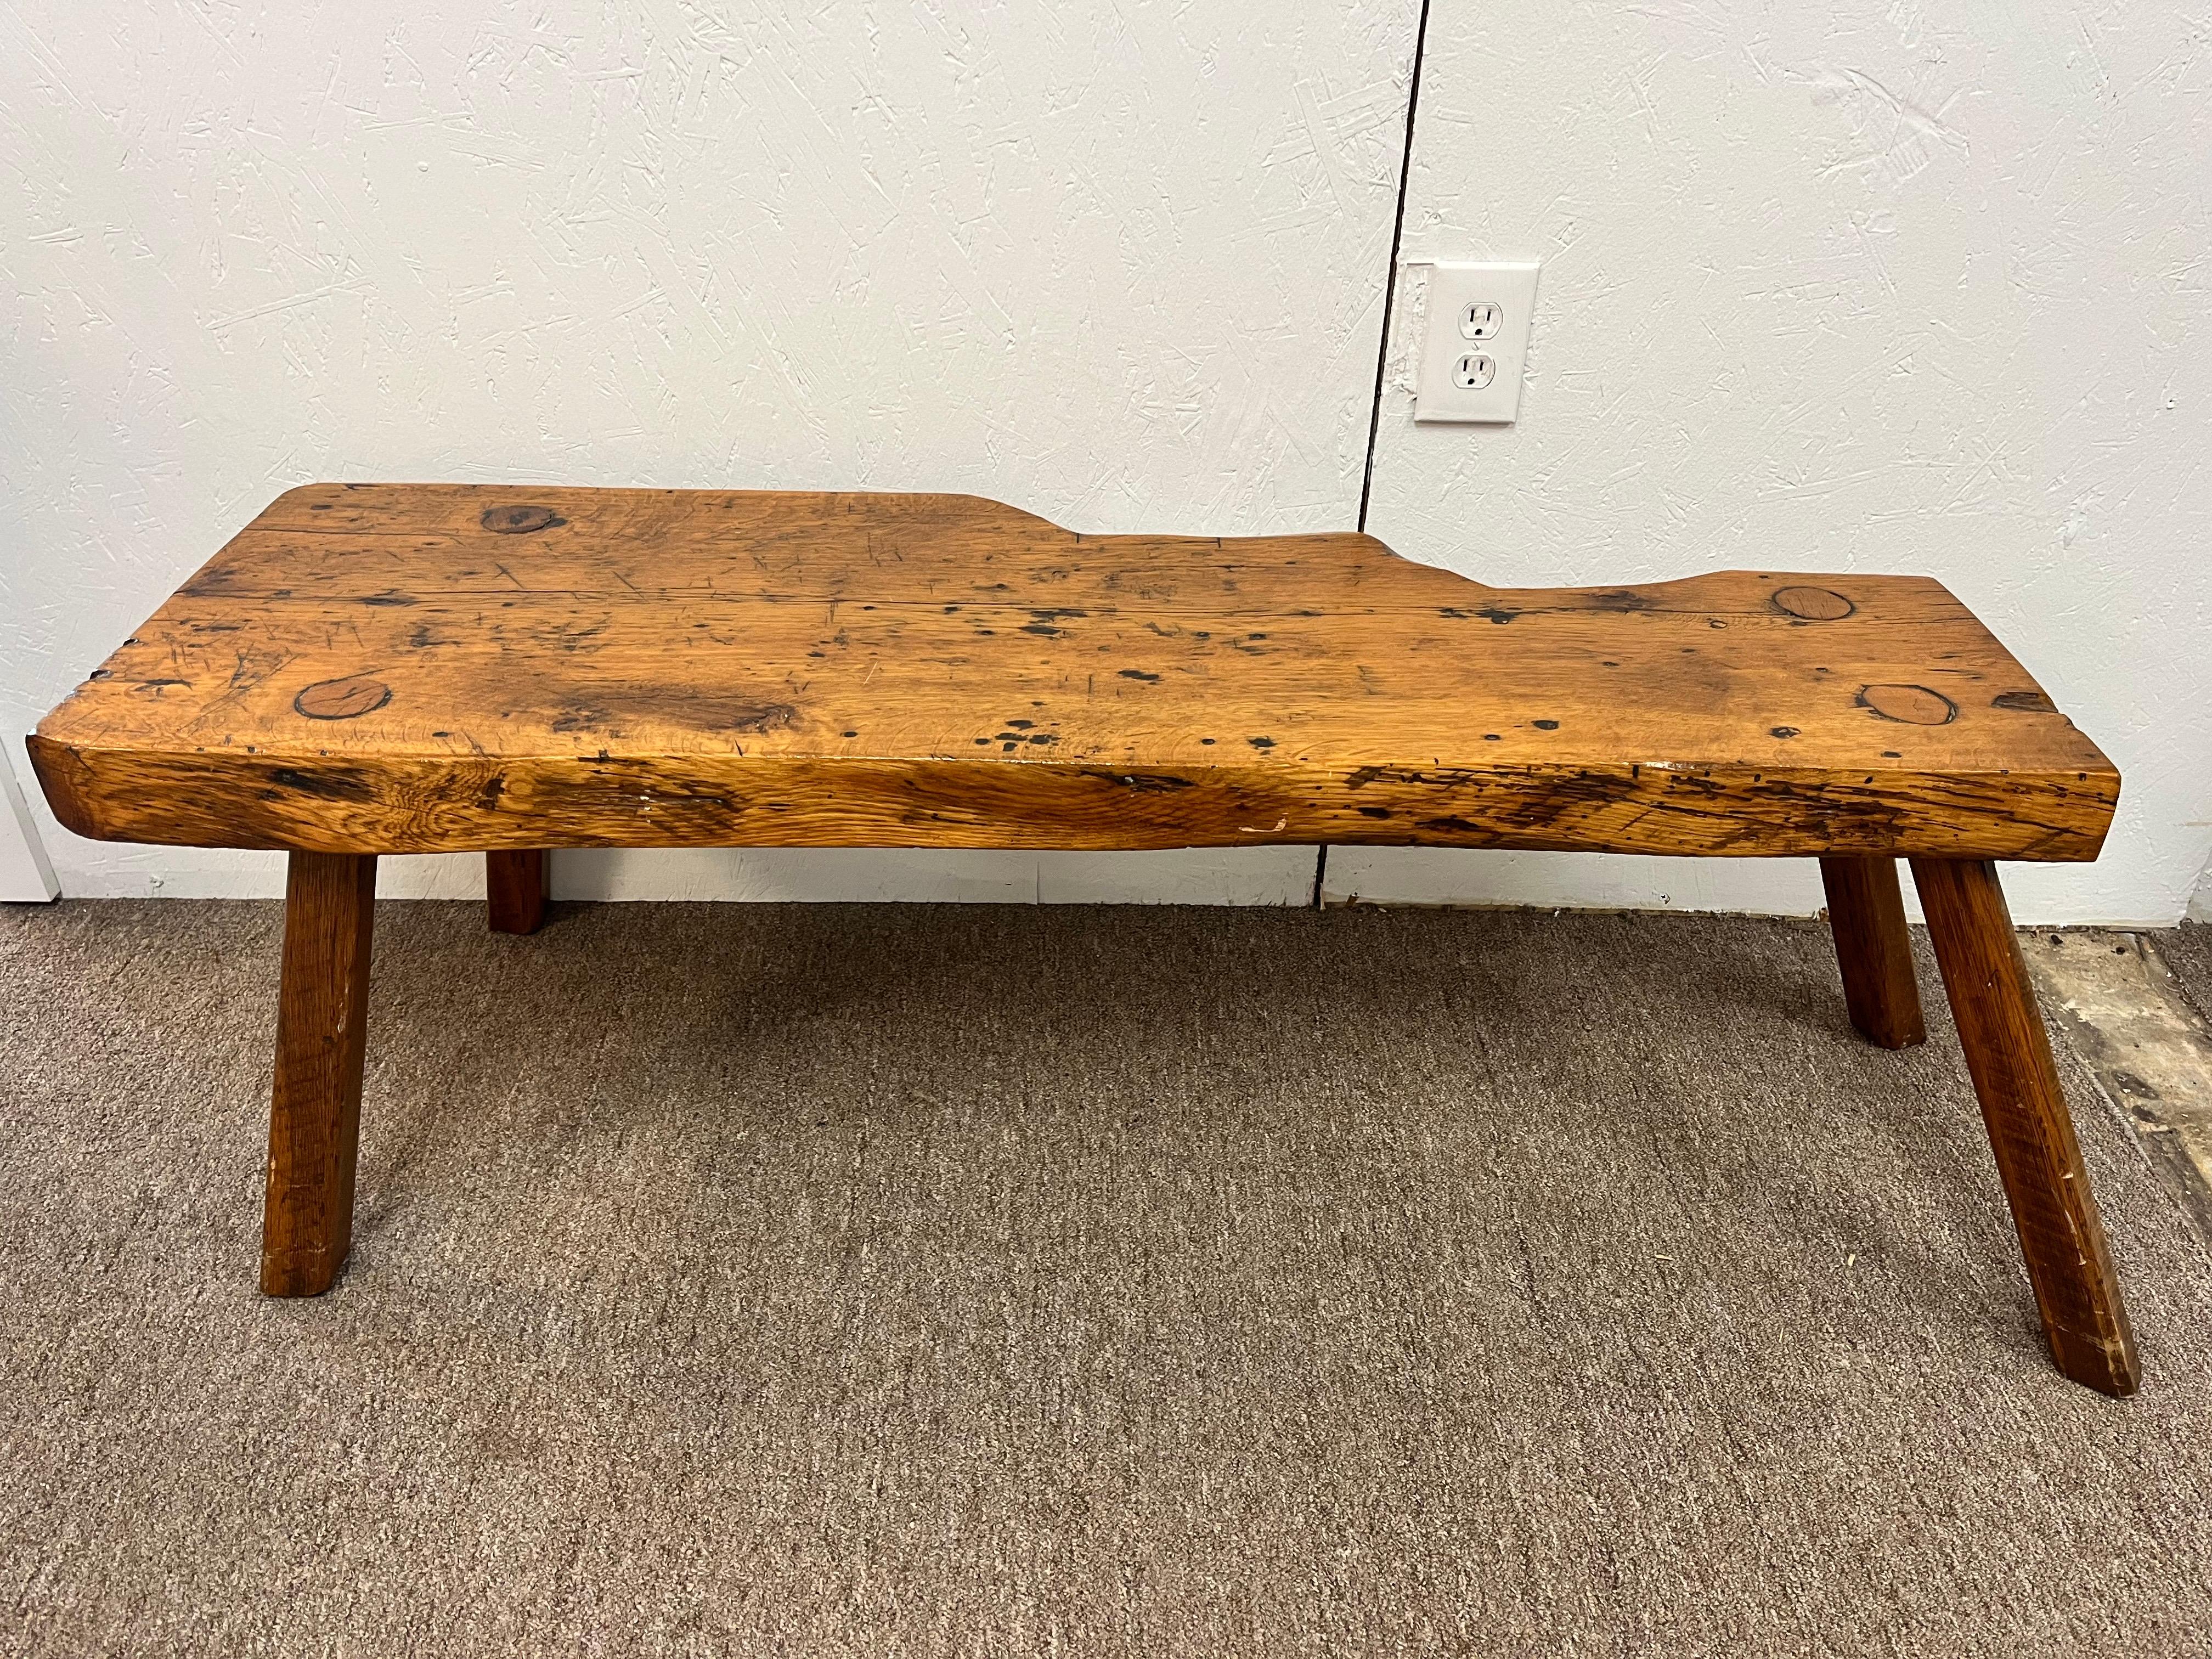 Wood Antique Early 19th Century Rustic Bench with Splayed Legs and Thick Cut Seat For Sale